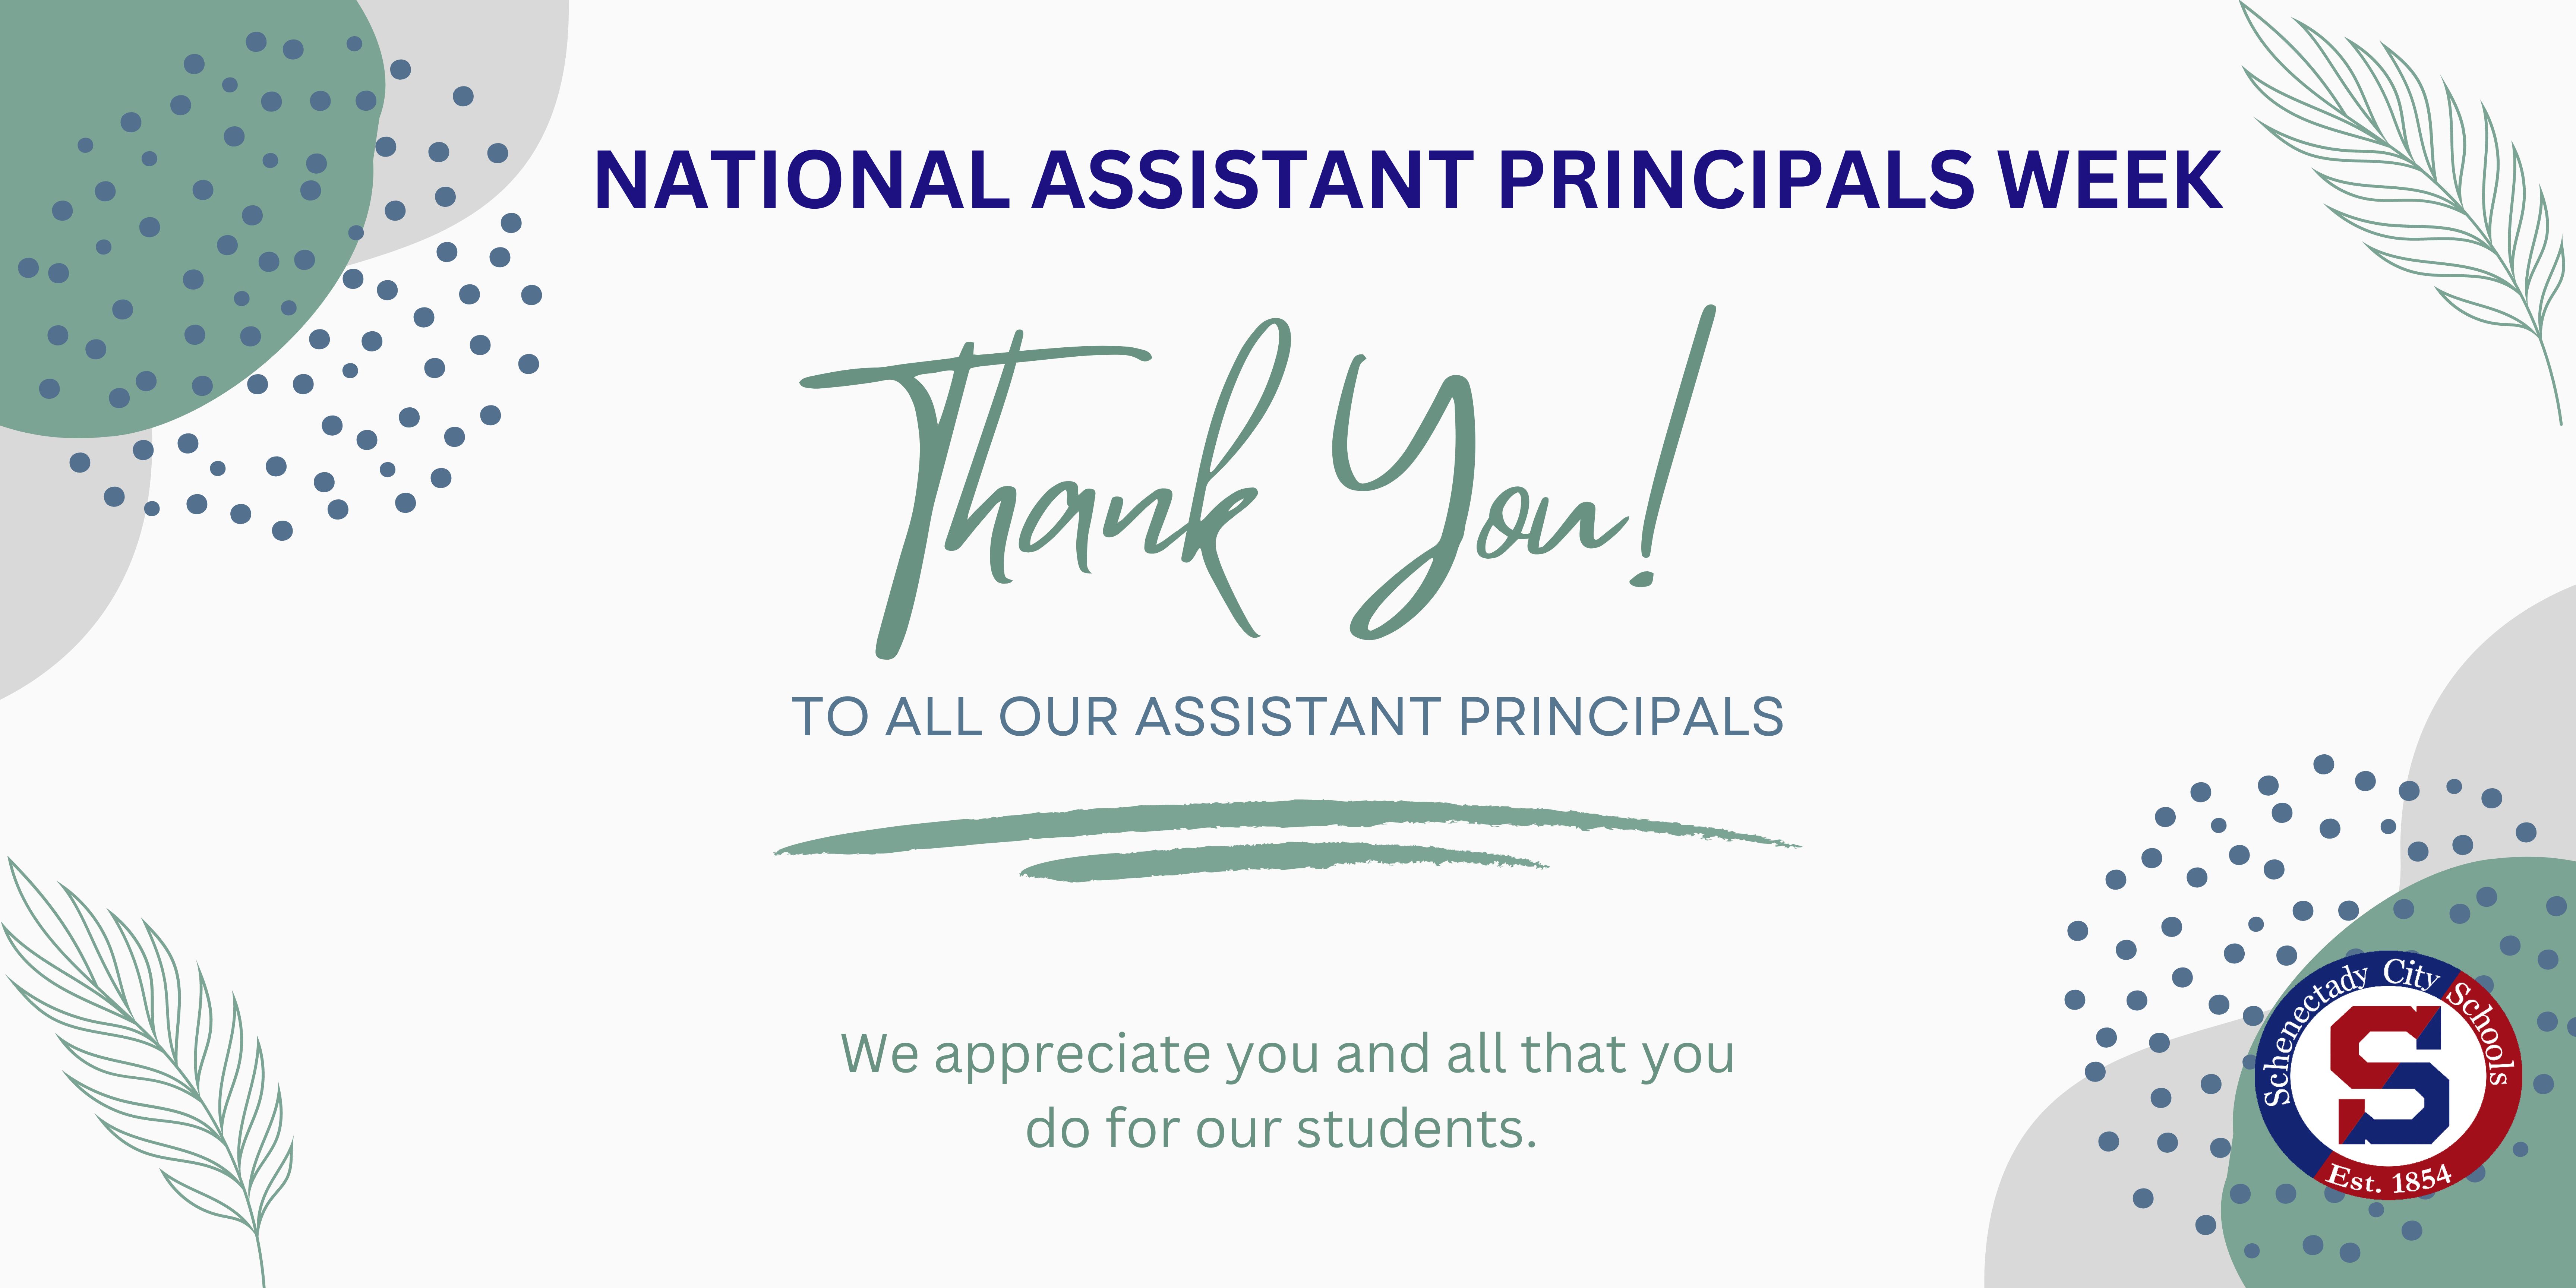 Thank you to our assistant princpals